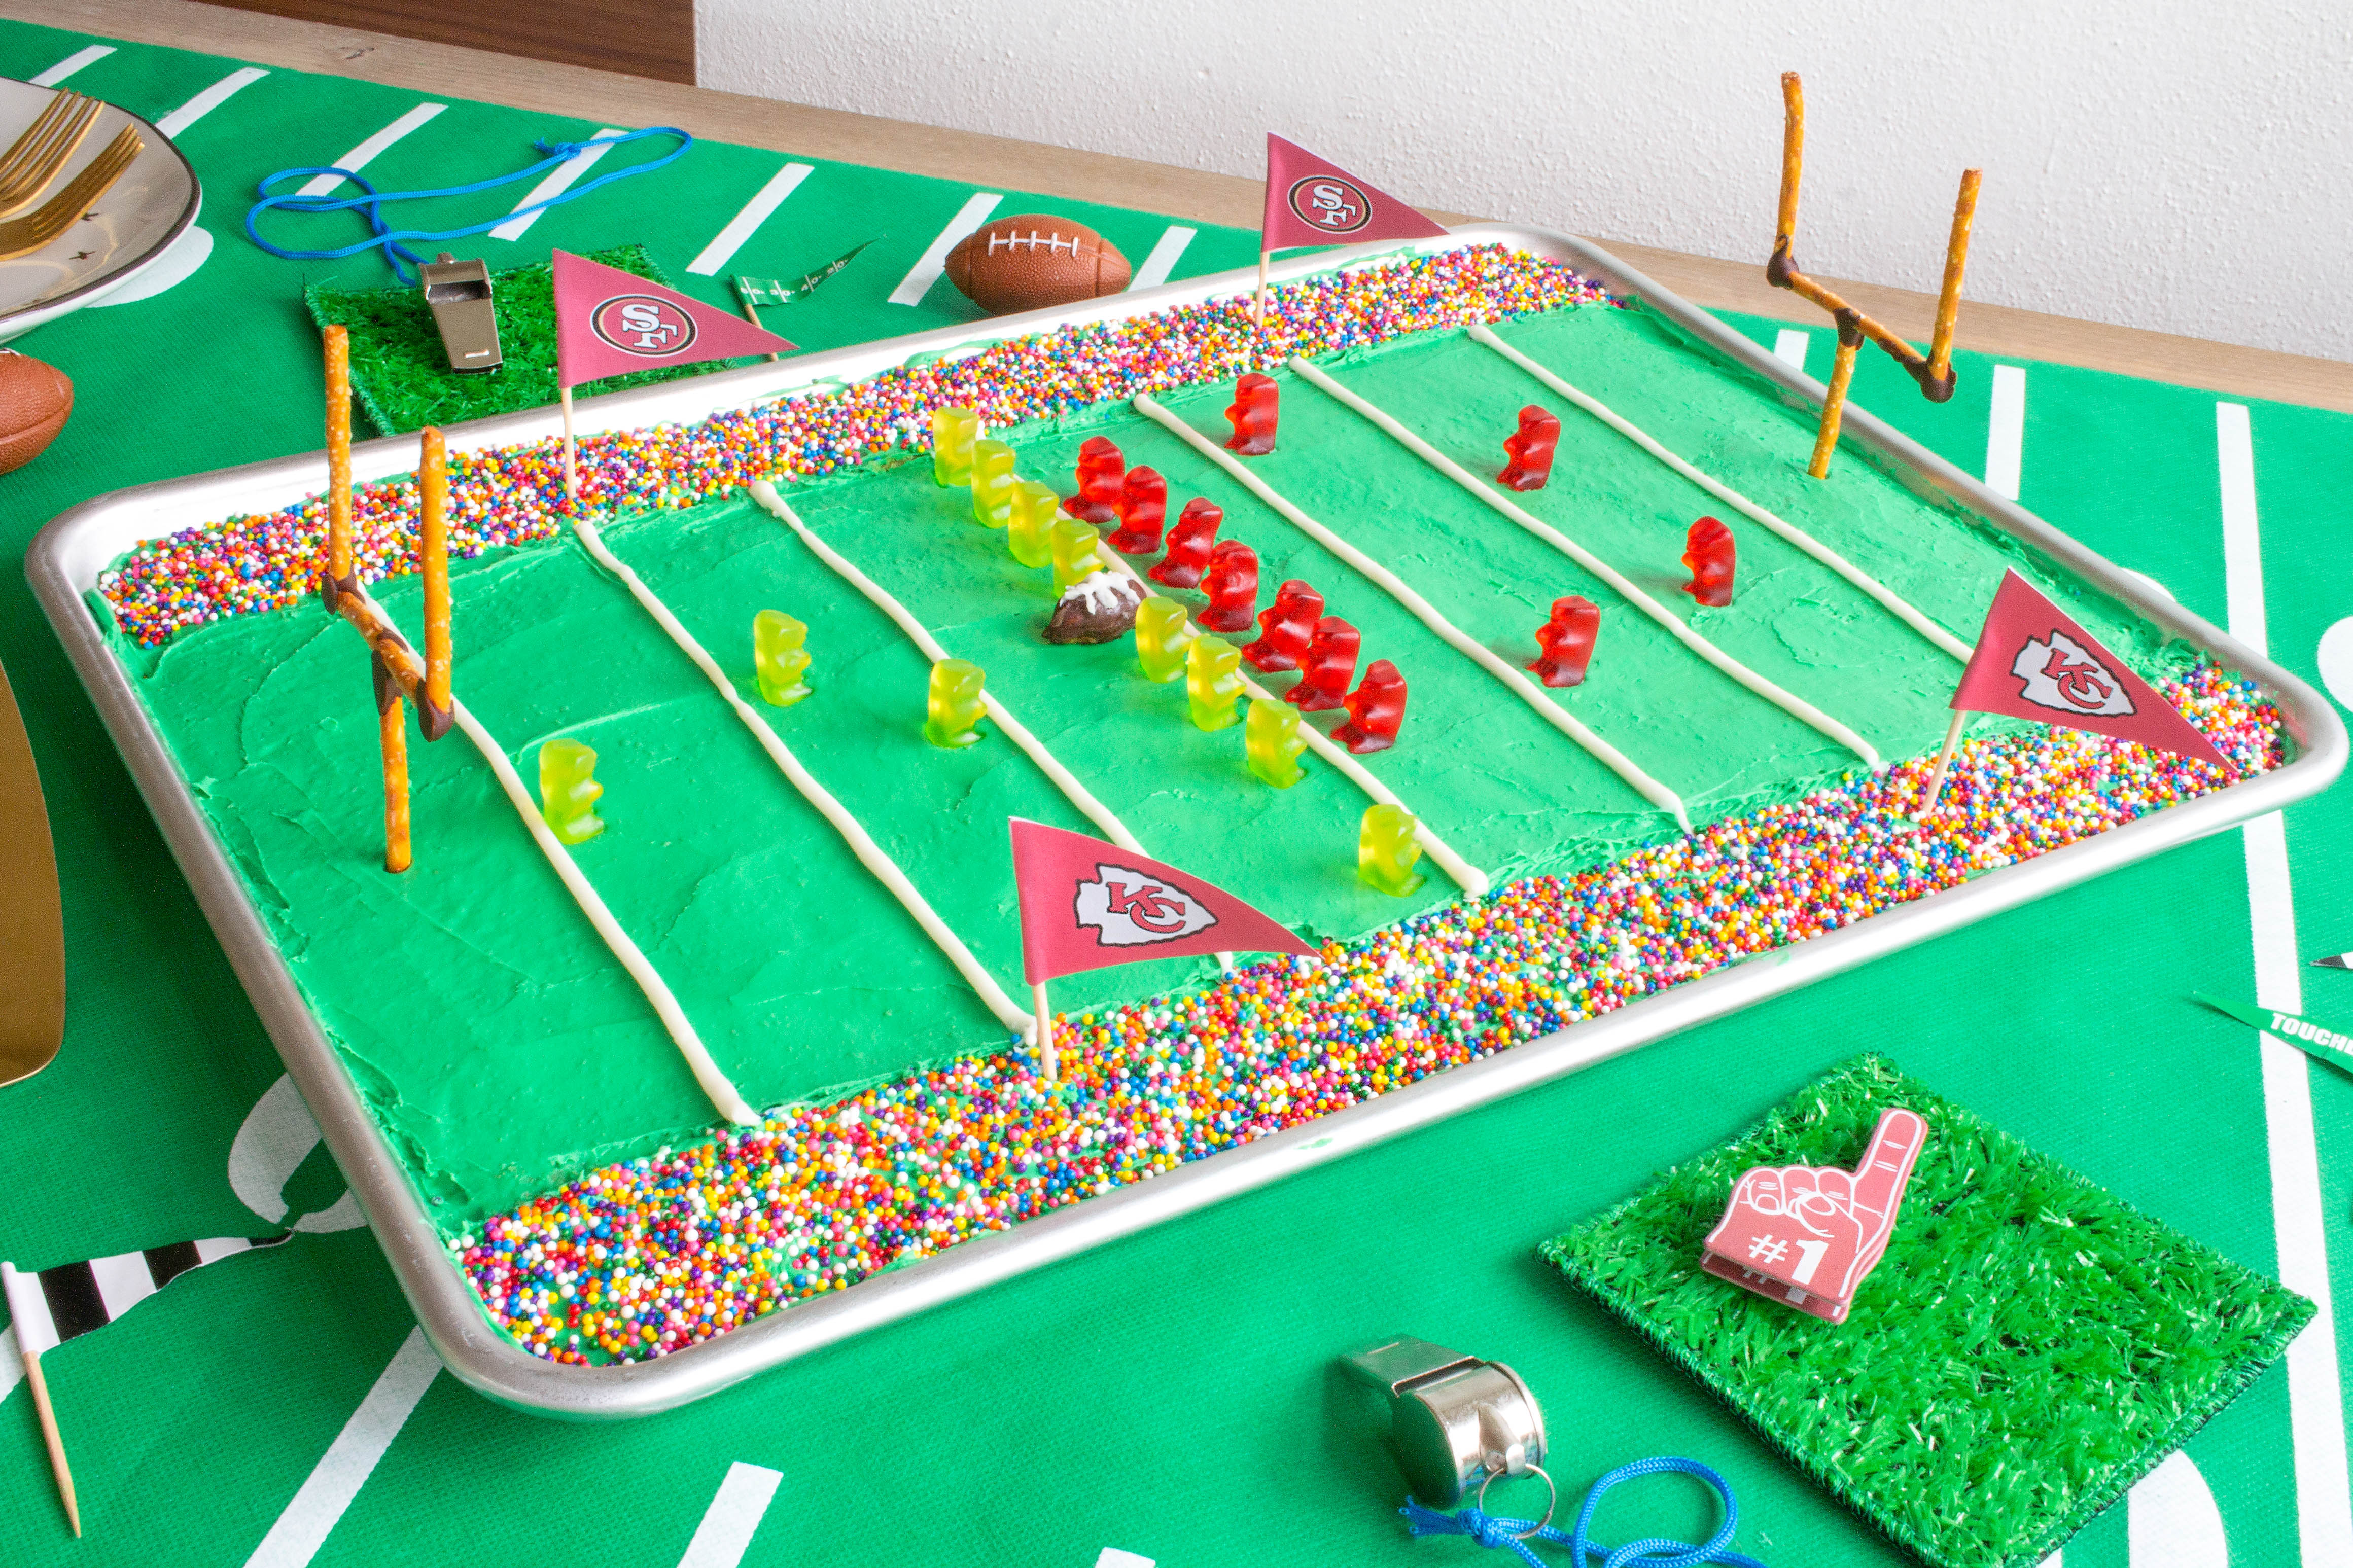 Football Pitch Cake - Buy Online, Free UK Delivery — New Cakes